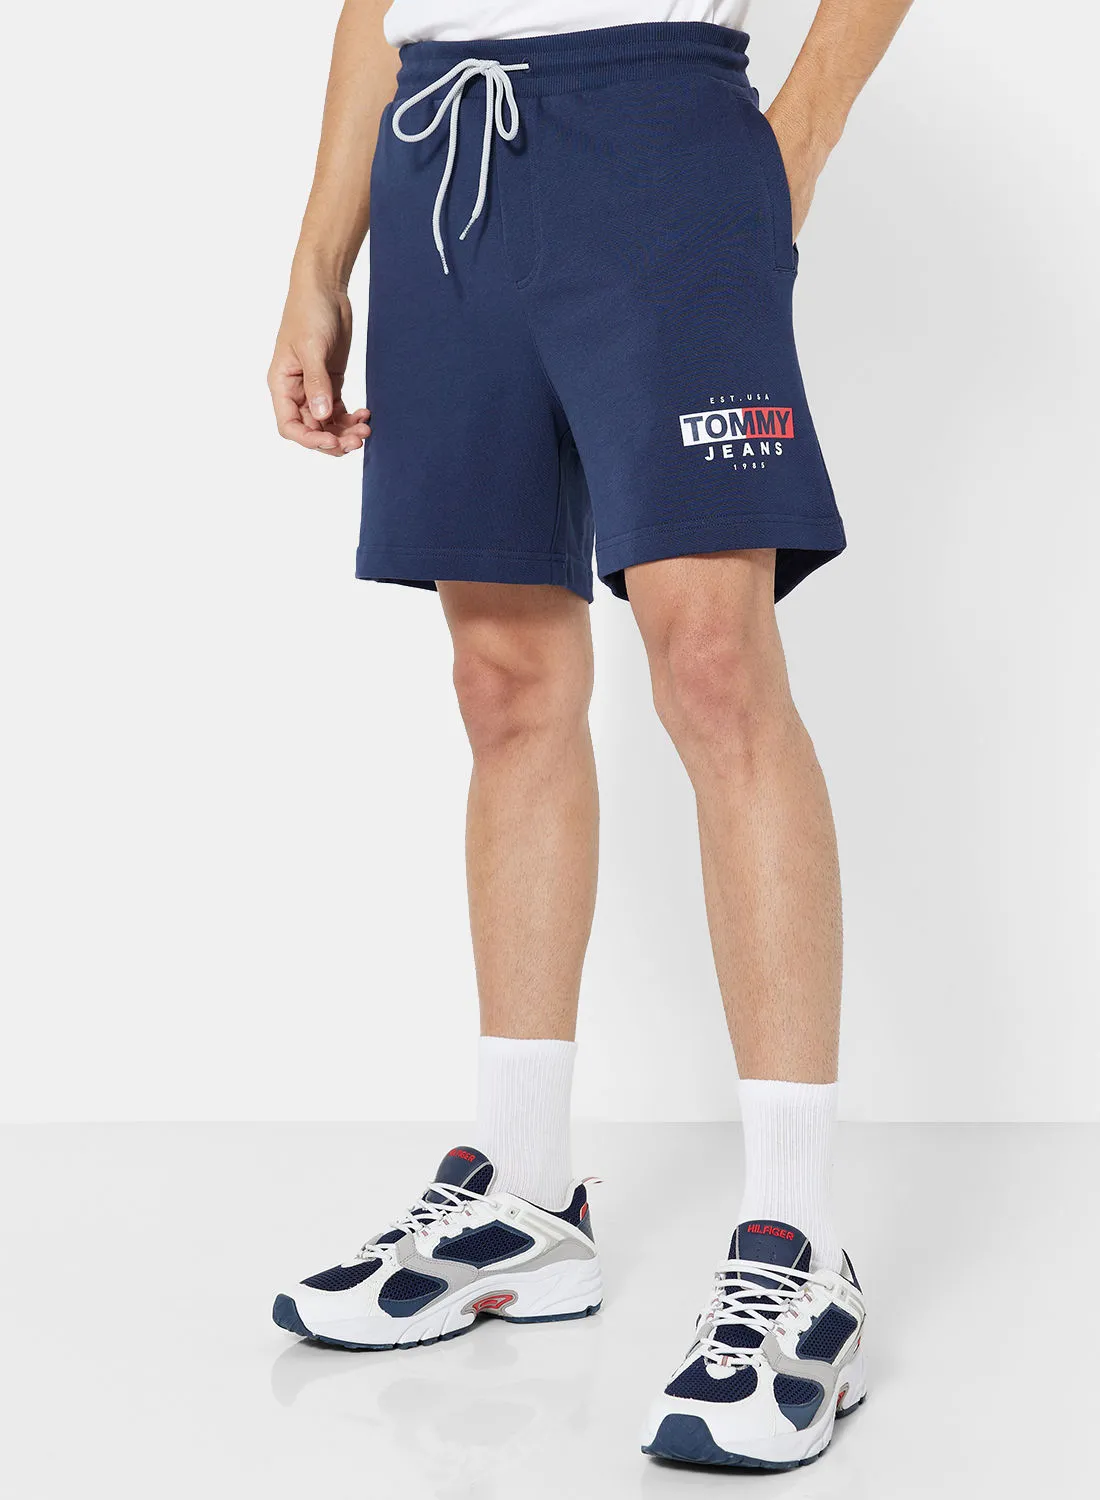 TOMMY JEANS Logo Entry Flag Shorts